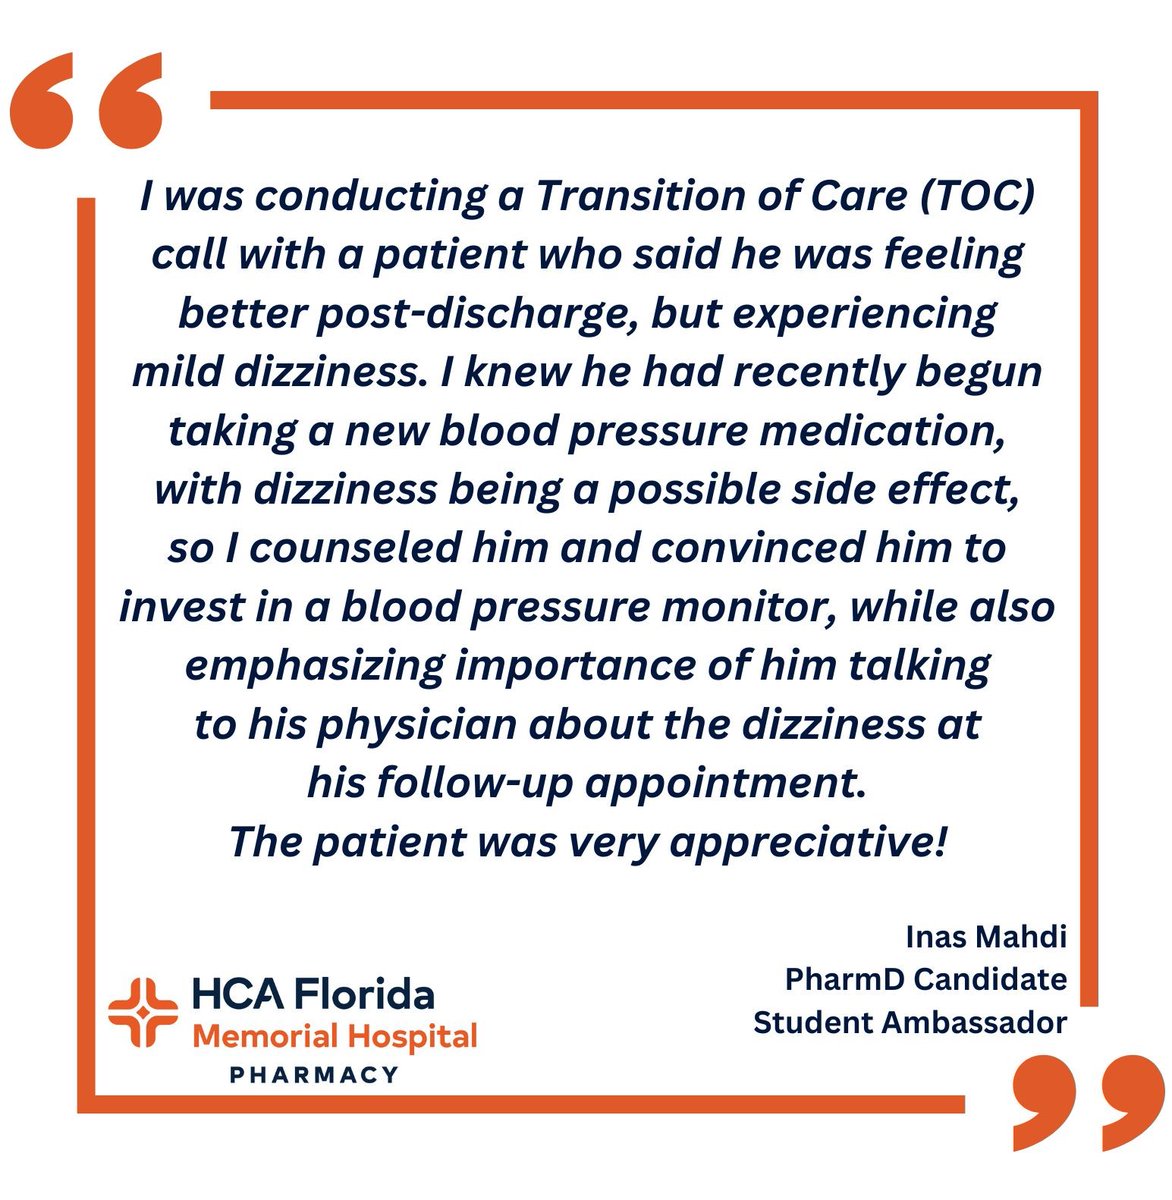 #XchangePoint allows users @HCAFLHealthcare (Memorial Hospital) to advocate for a patient’s medication treatment plan throughout the care continuum helping ensure adherence post discharge. #MedTransition